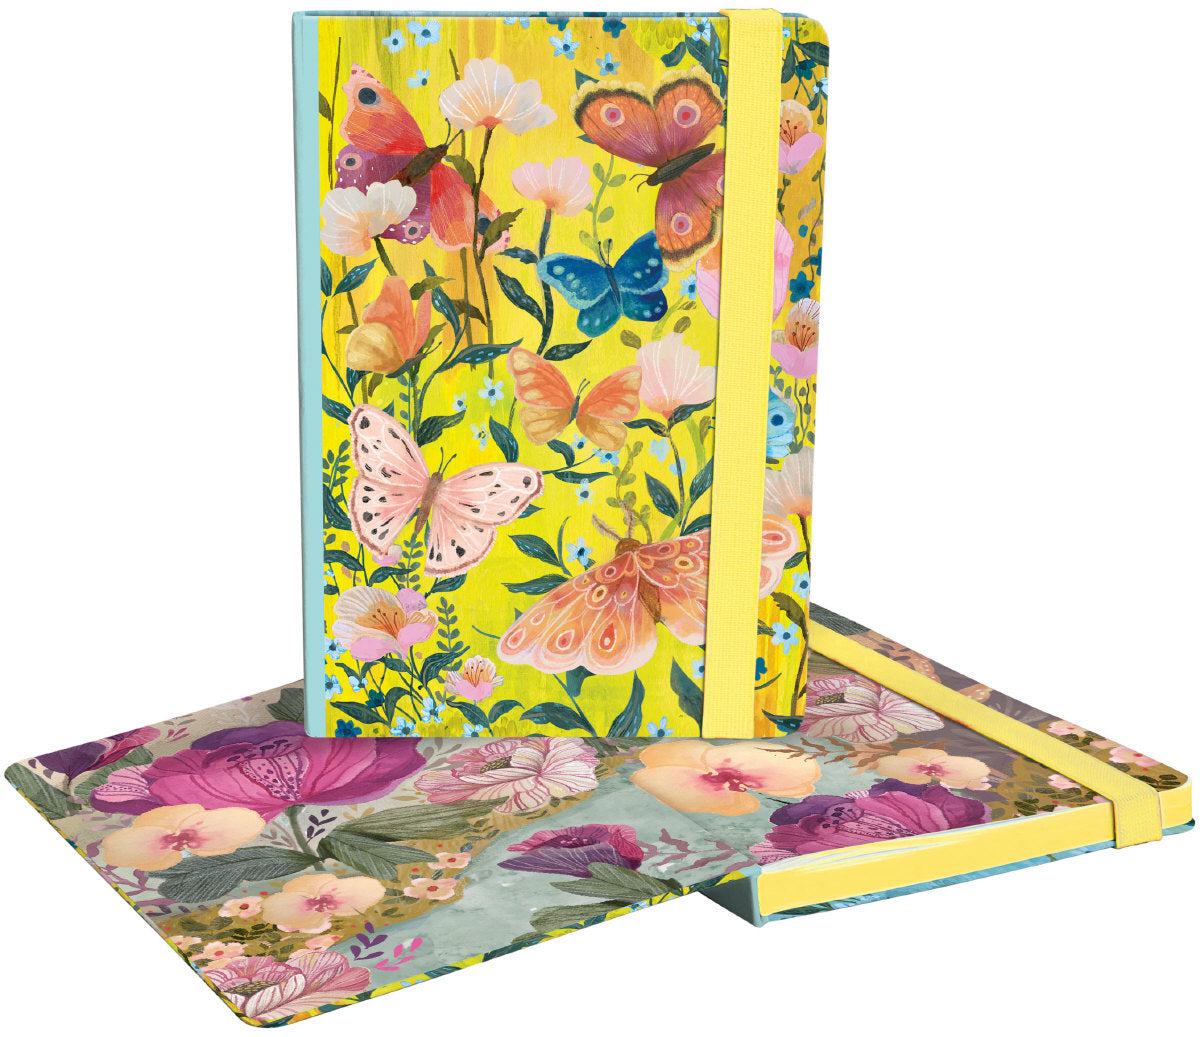 Butterfly Ball A5 Hardback Journal with elastic binder 2